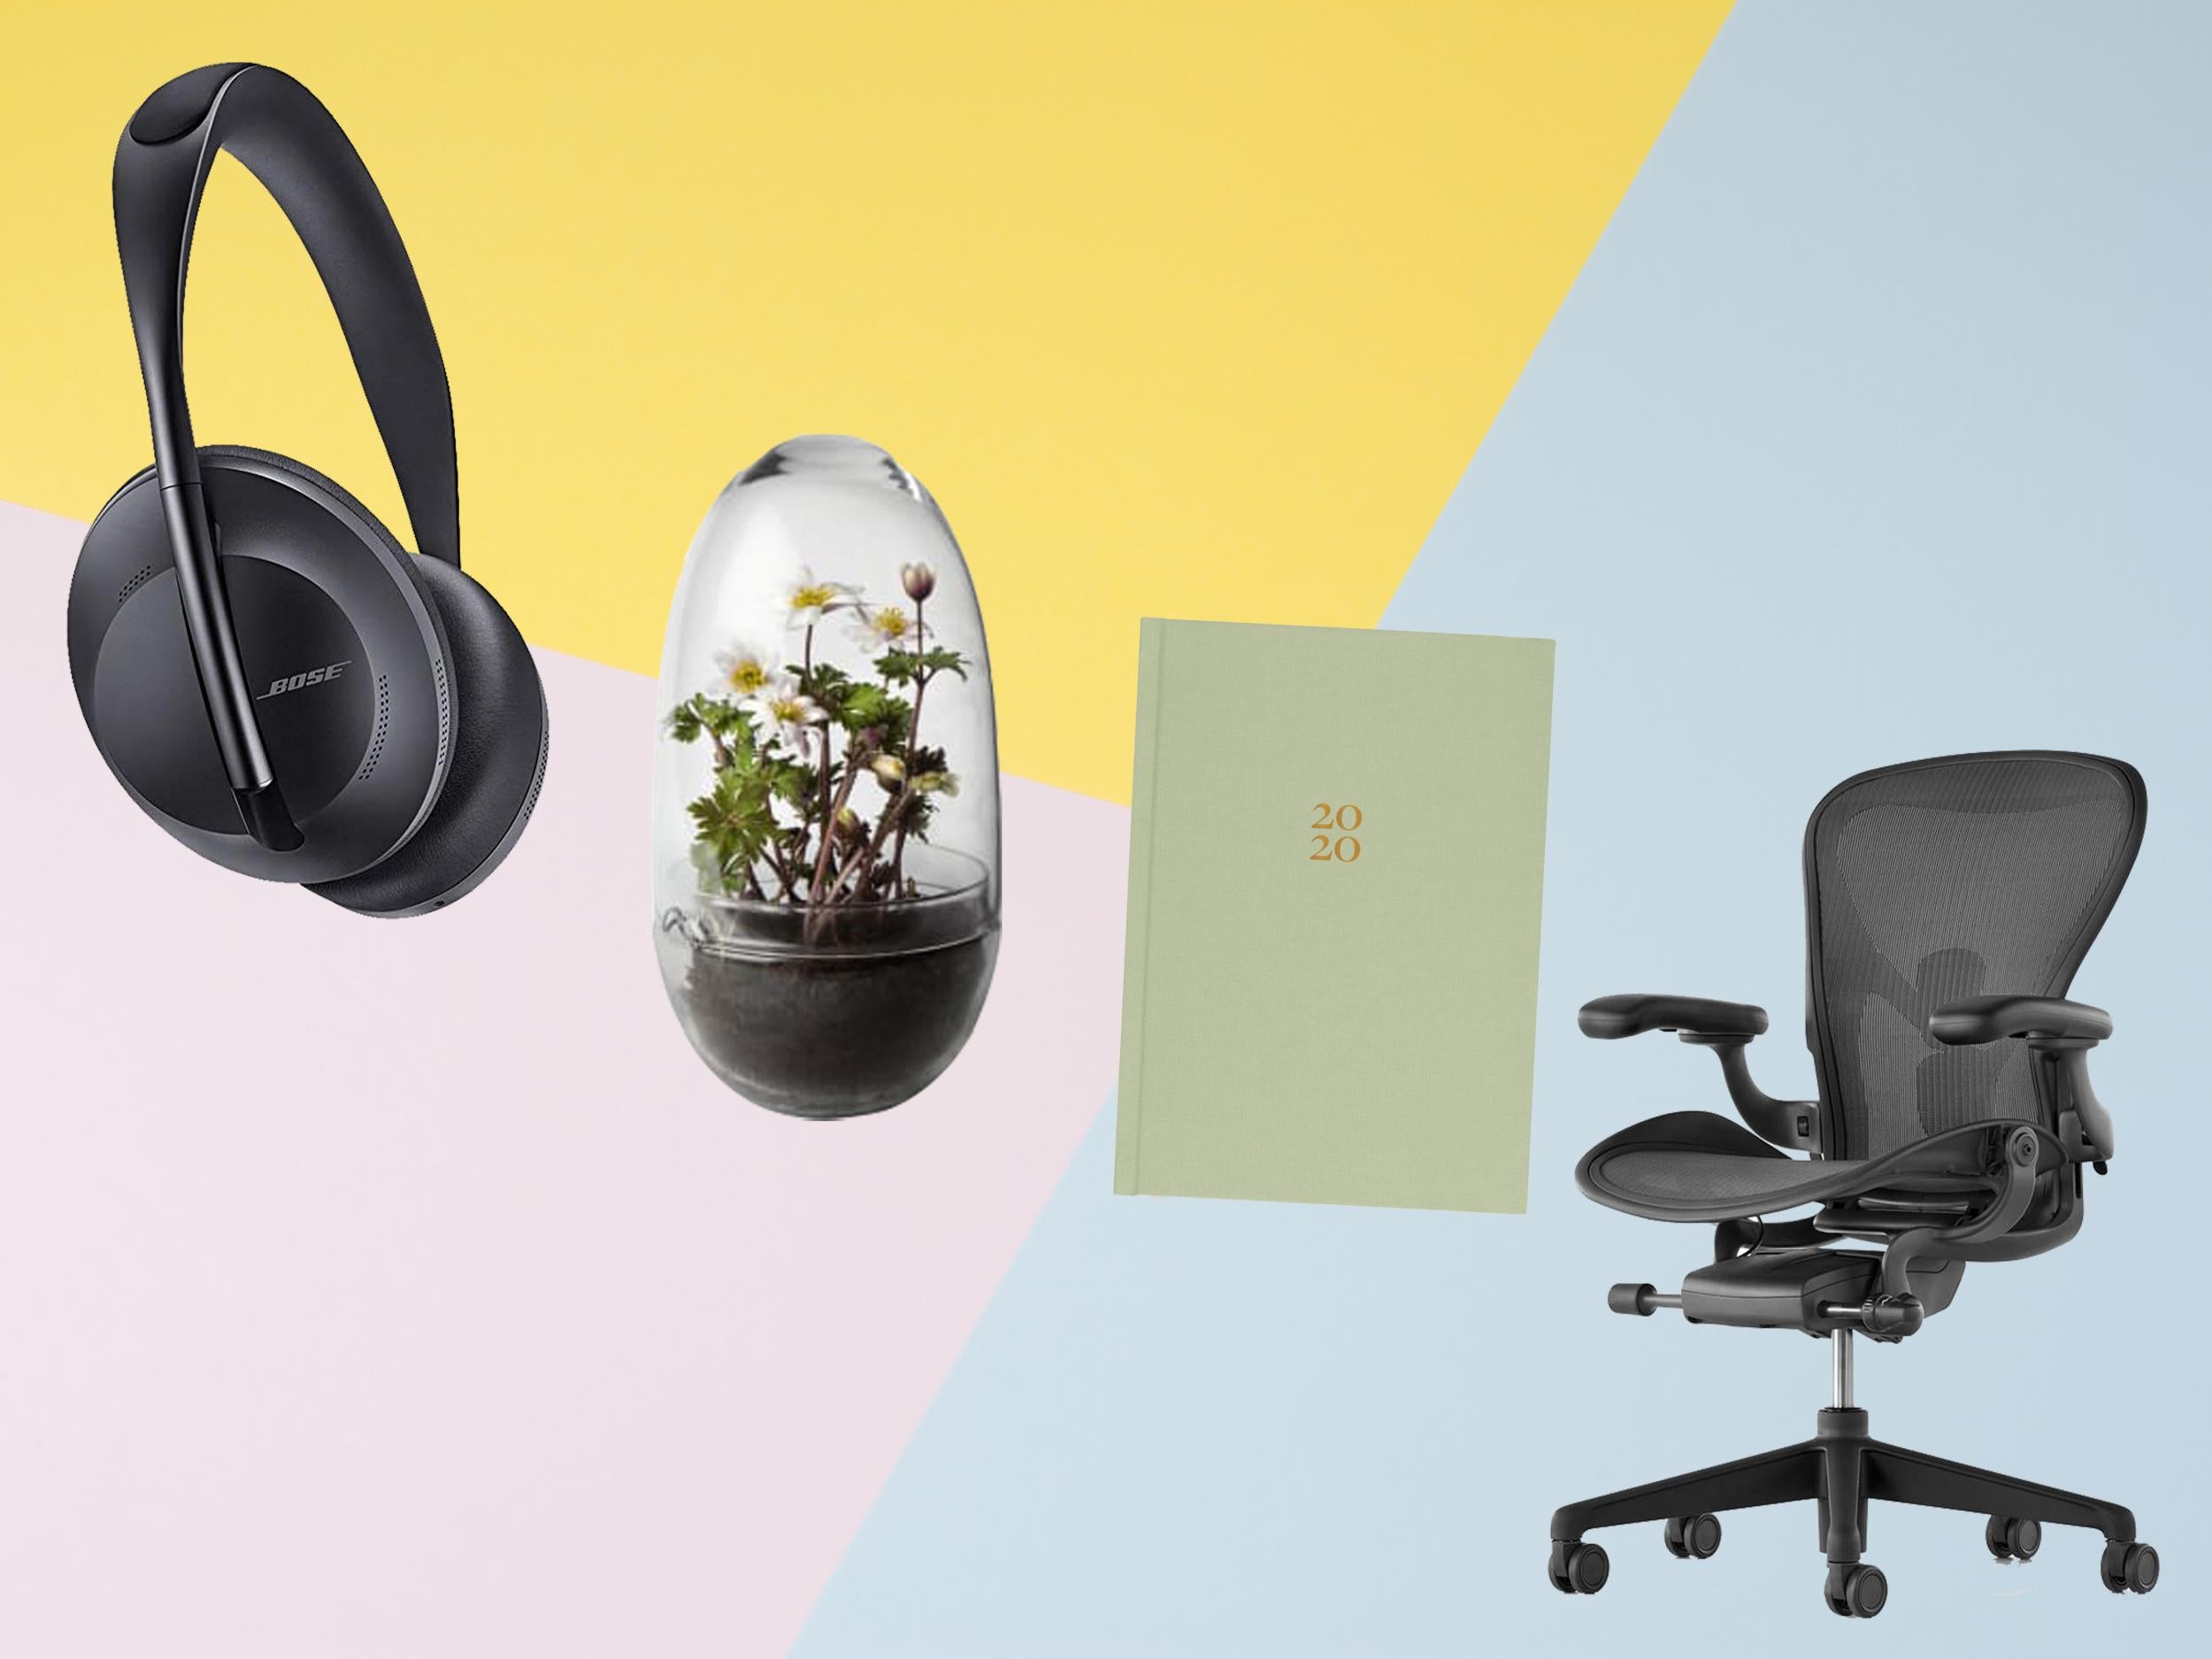 Maintain productivity with these hardworking buys